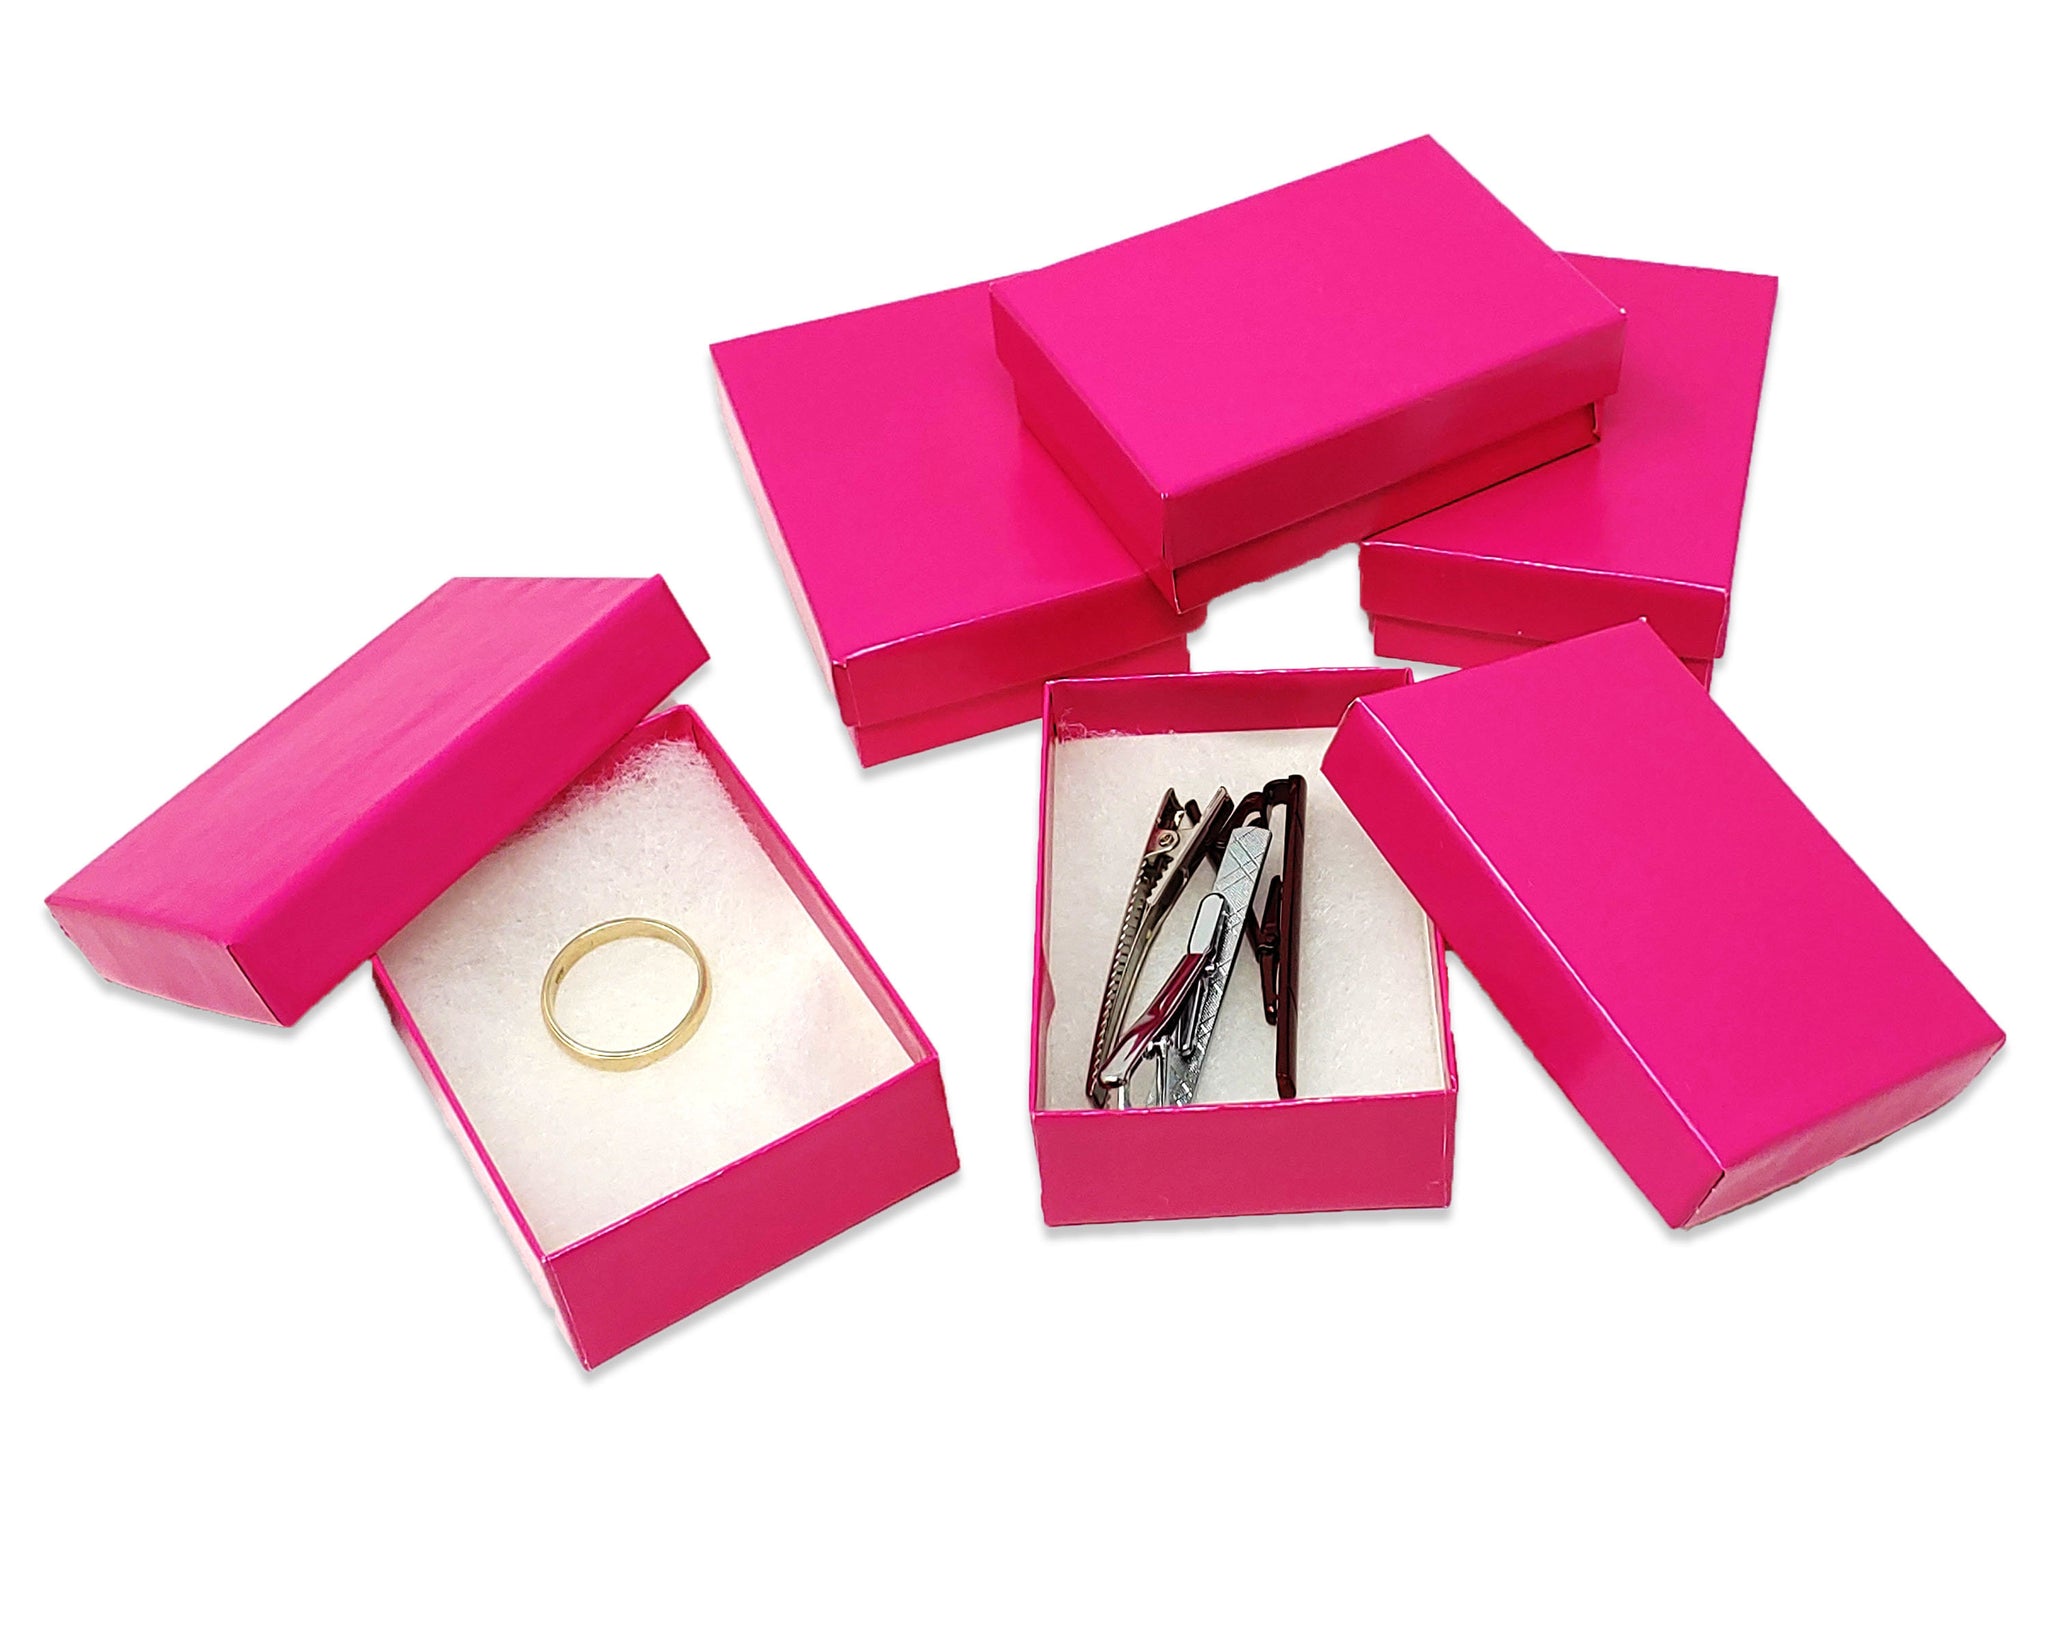 USA- Hot Pink 3x2x1 Inch Cotton Filled Presentation Jewelry Boxes